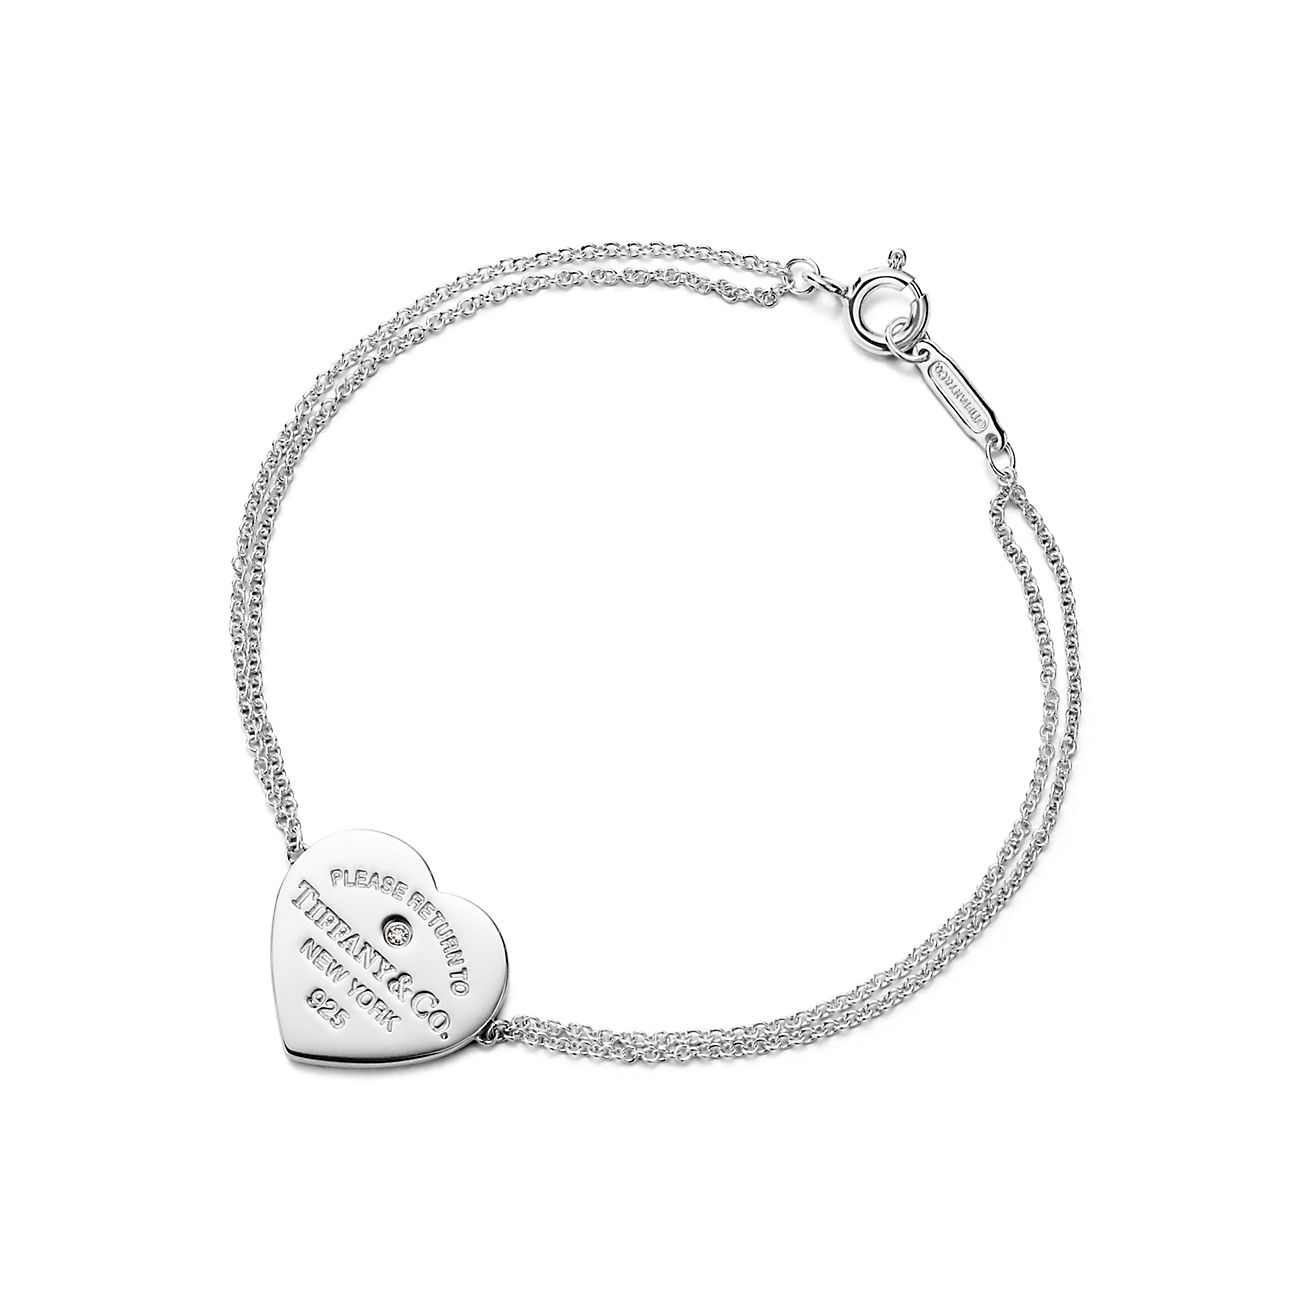 Return to Tiffany™Heart Double Chain Bracelet in Silver with a Diamond, Small